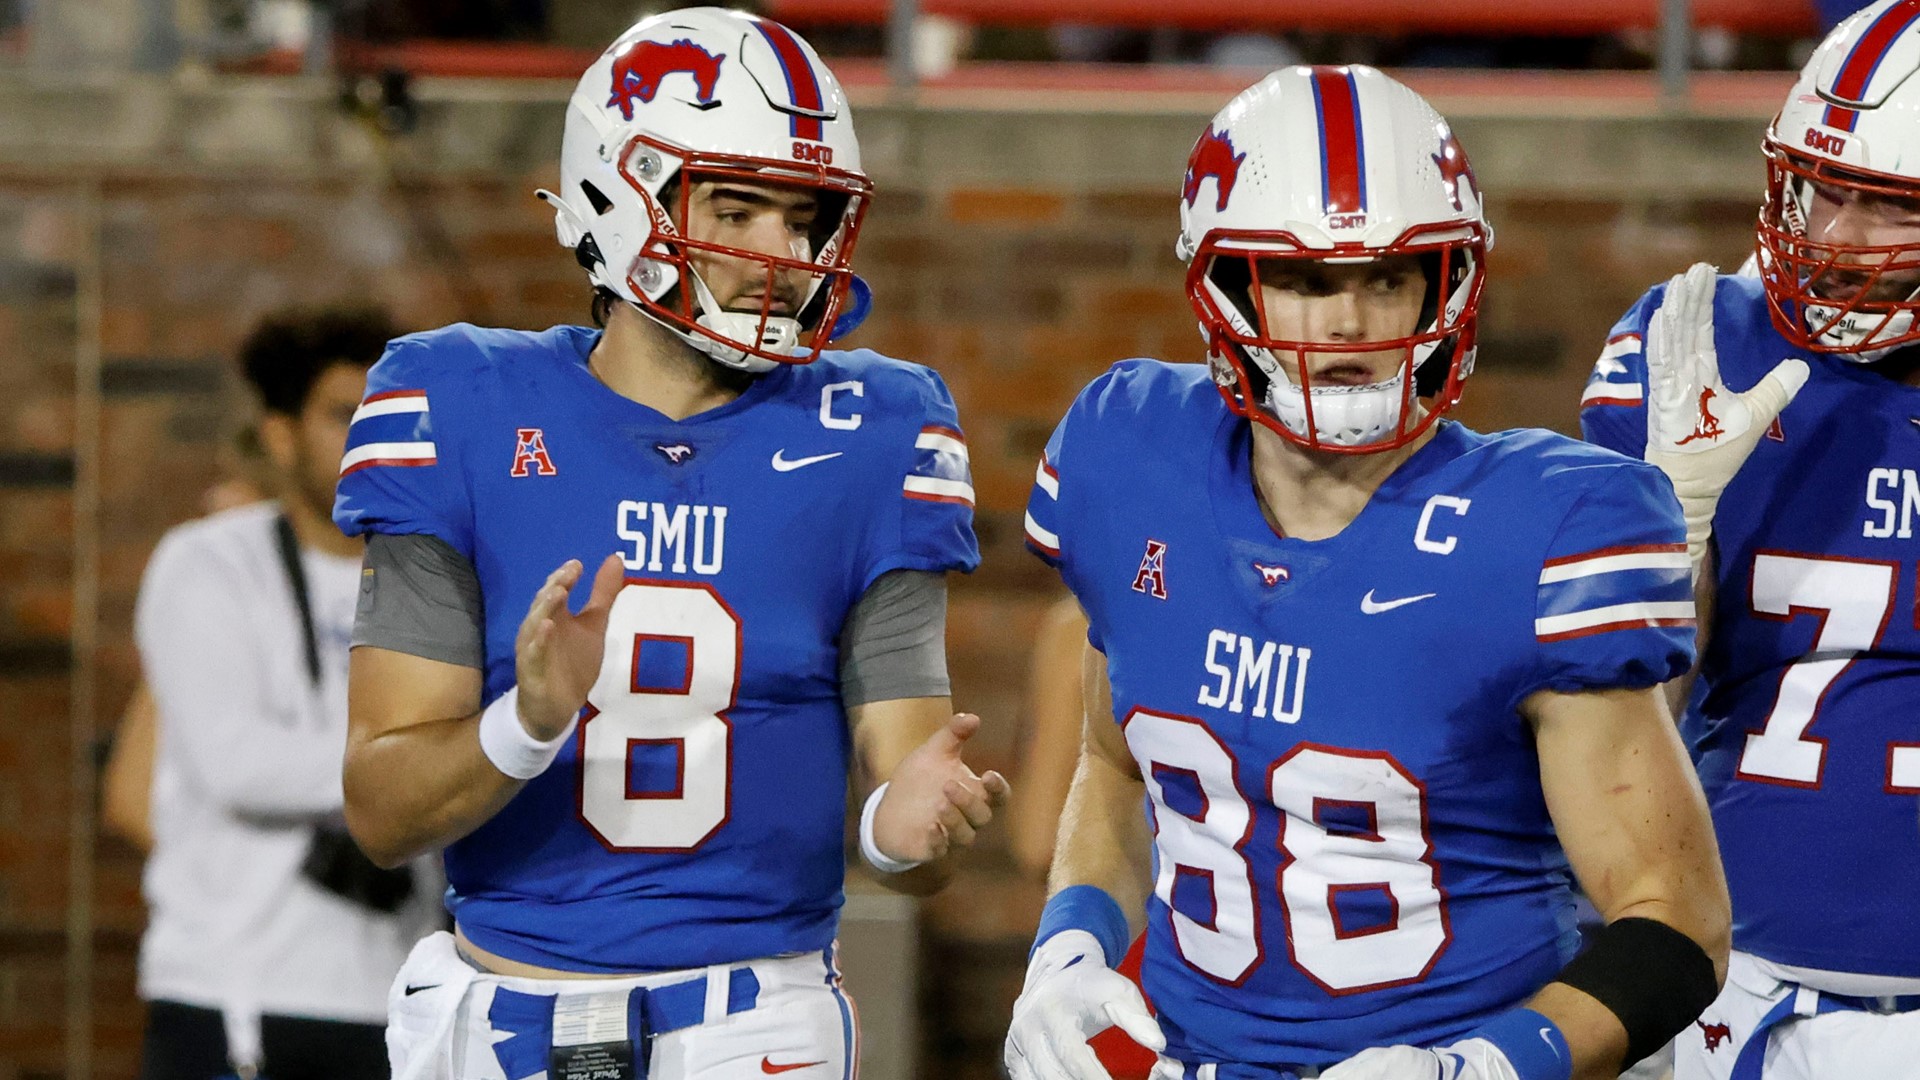 SMU made their AP Top 25 season debuts this week, raising to 44 the total number of teams to be ranked for at least a week this season.